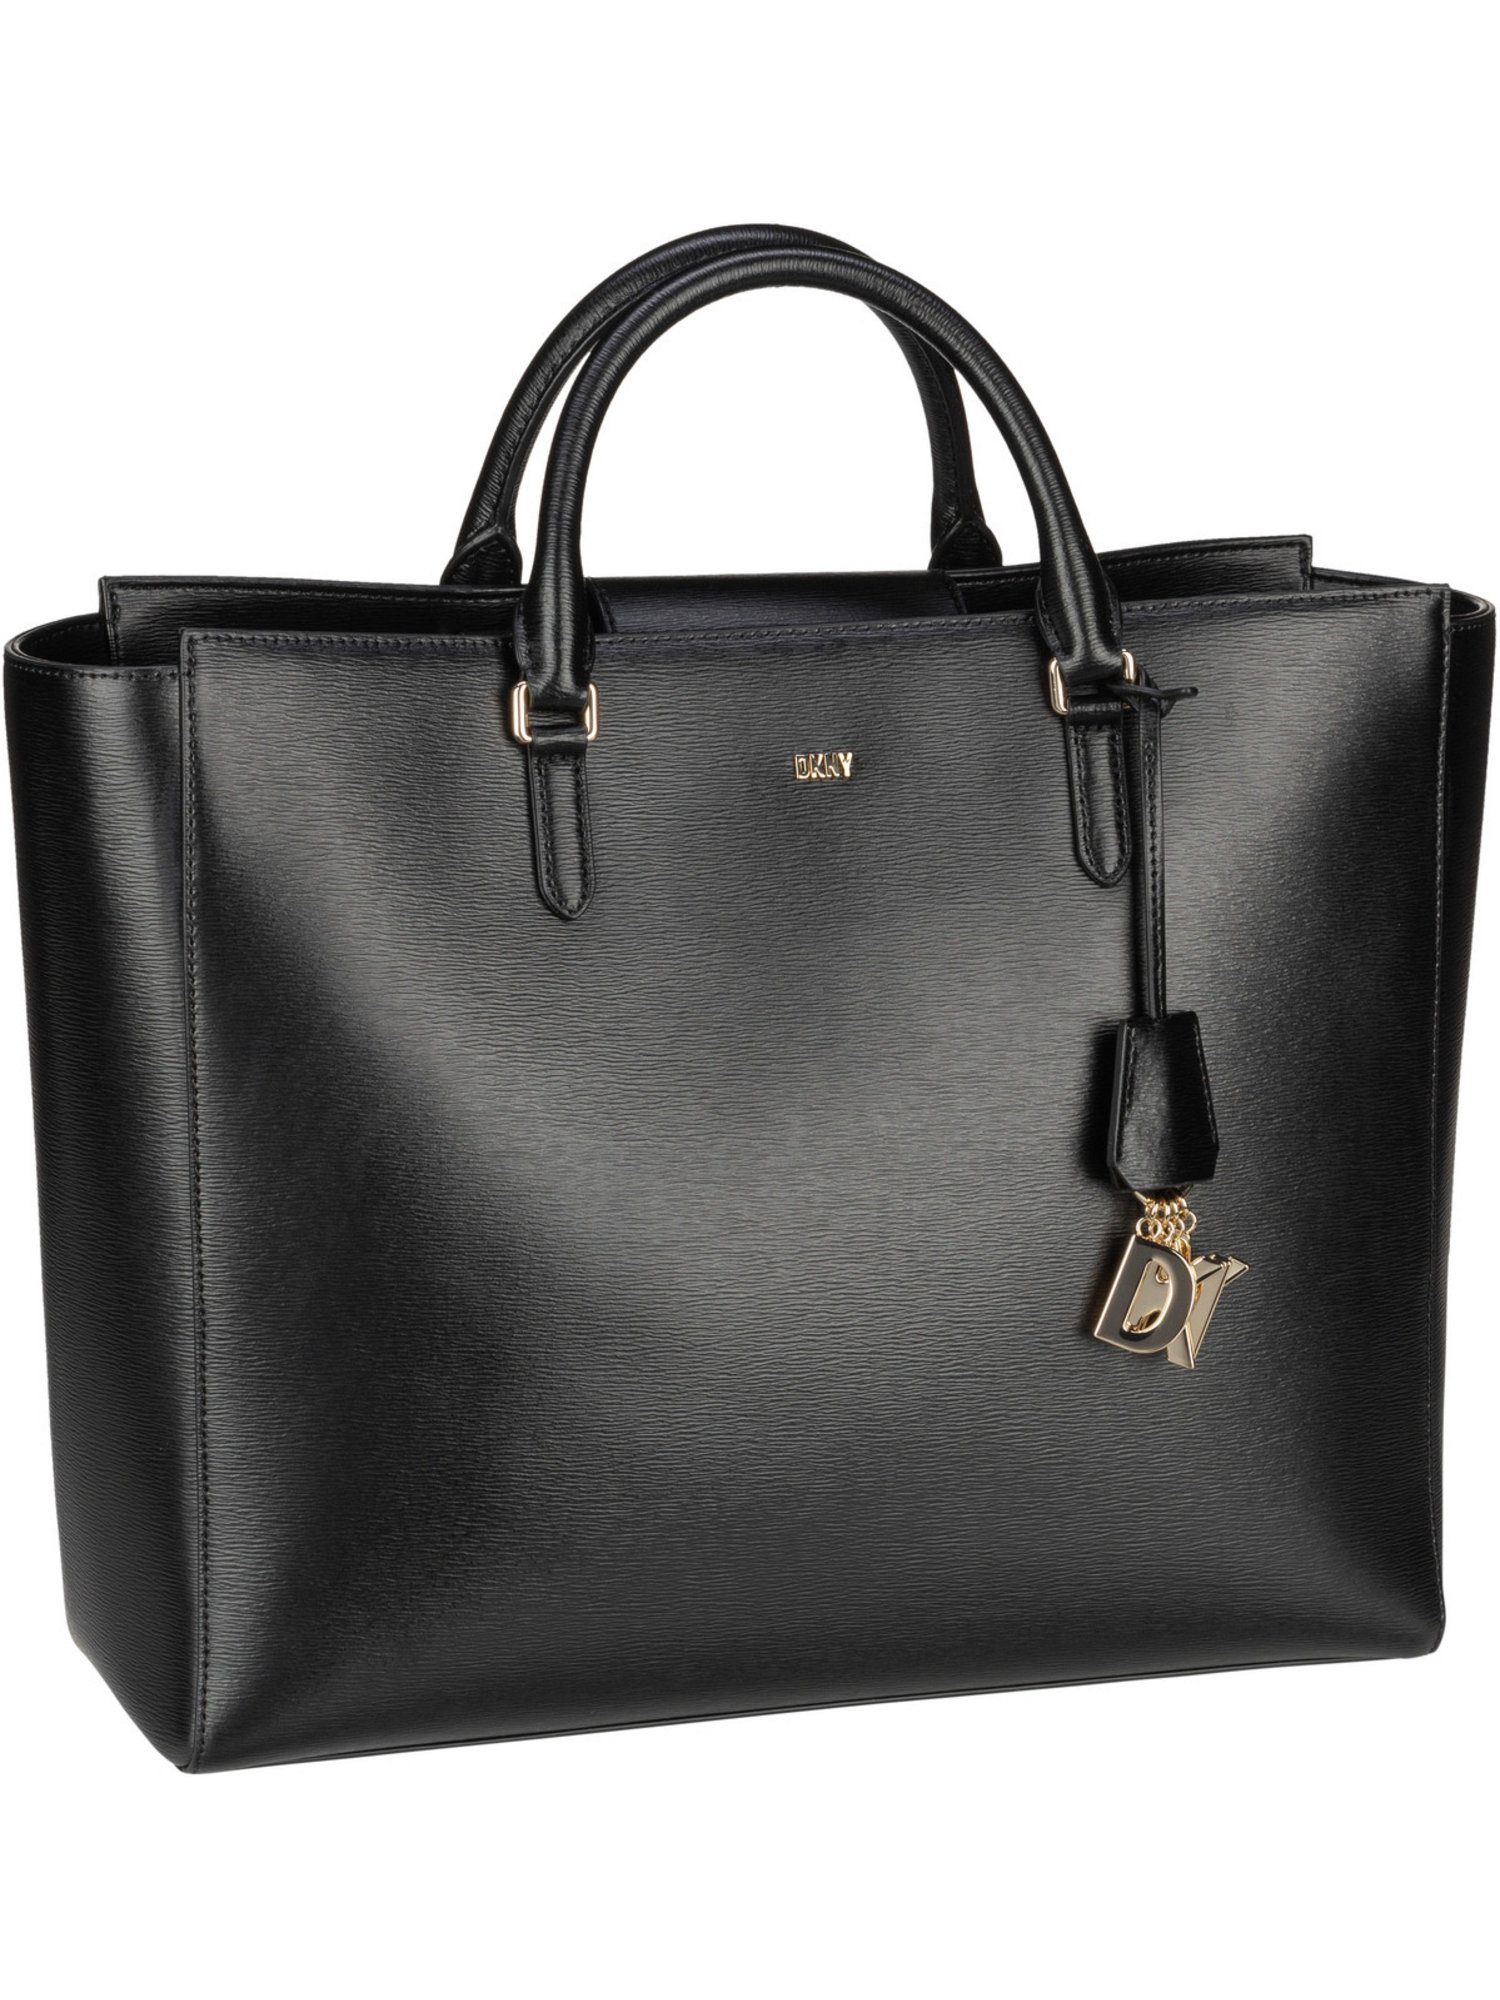 Tote Leather Sutton Book Shopper DKNY Paige